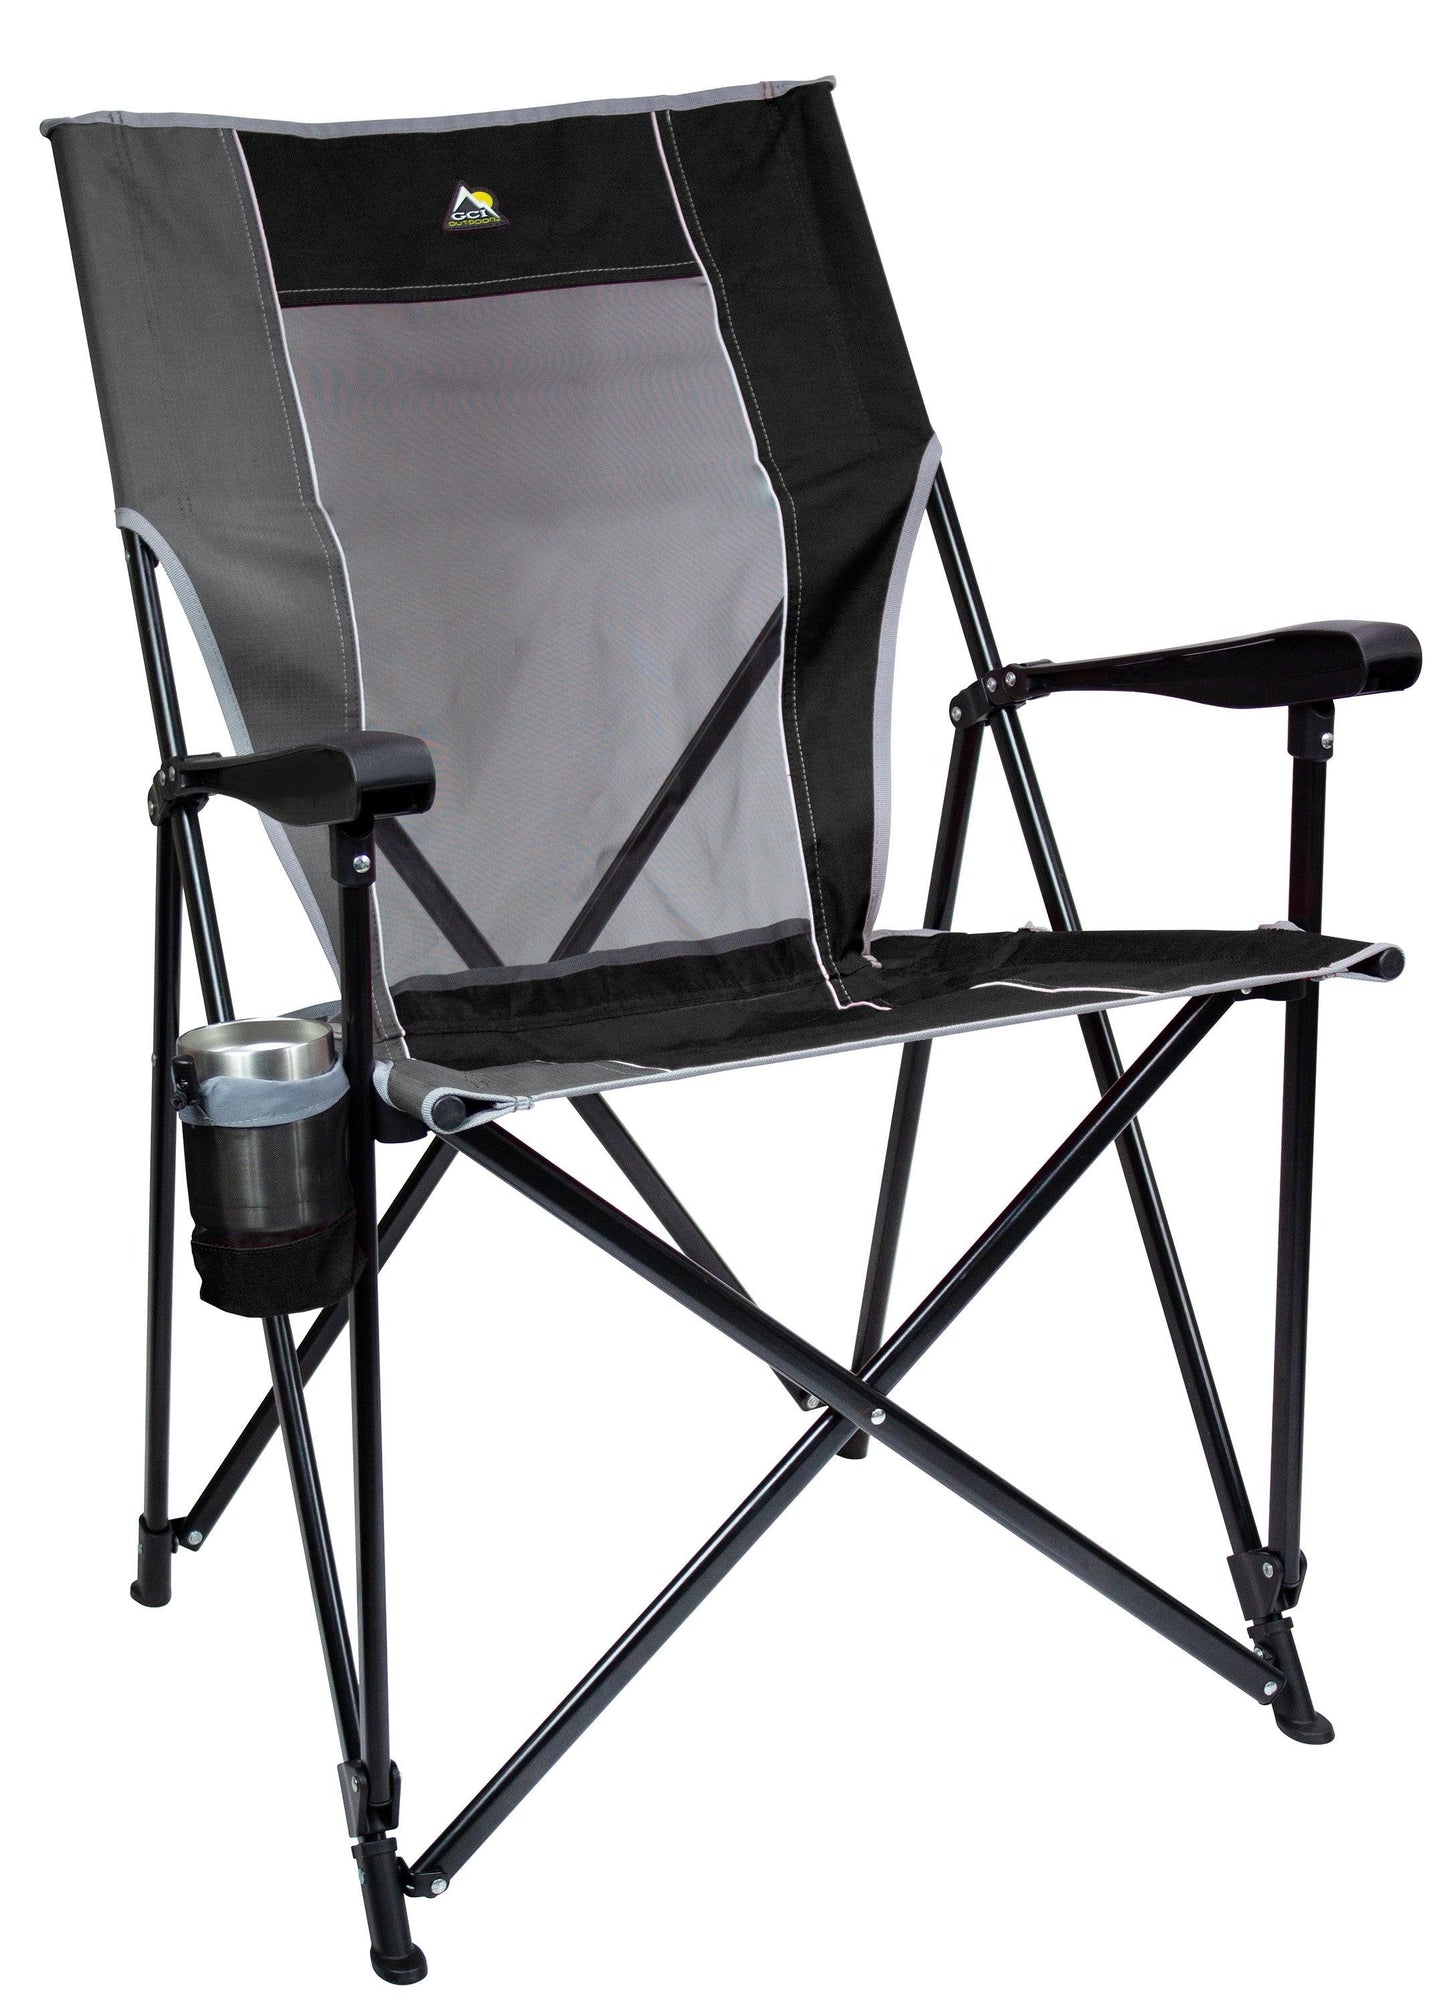 GCI Outdoor Eazy Chair XL Portable Camping Chair